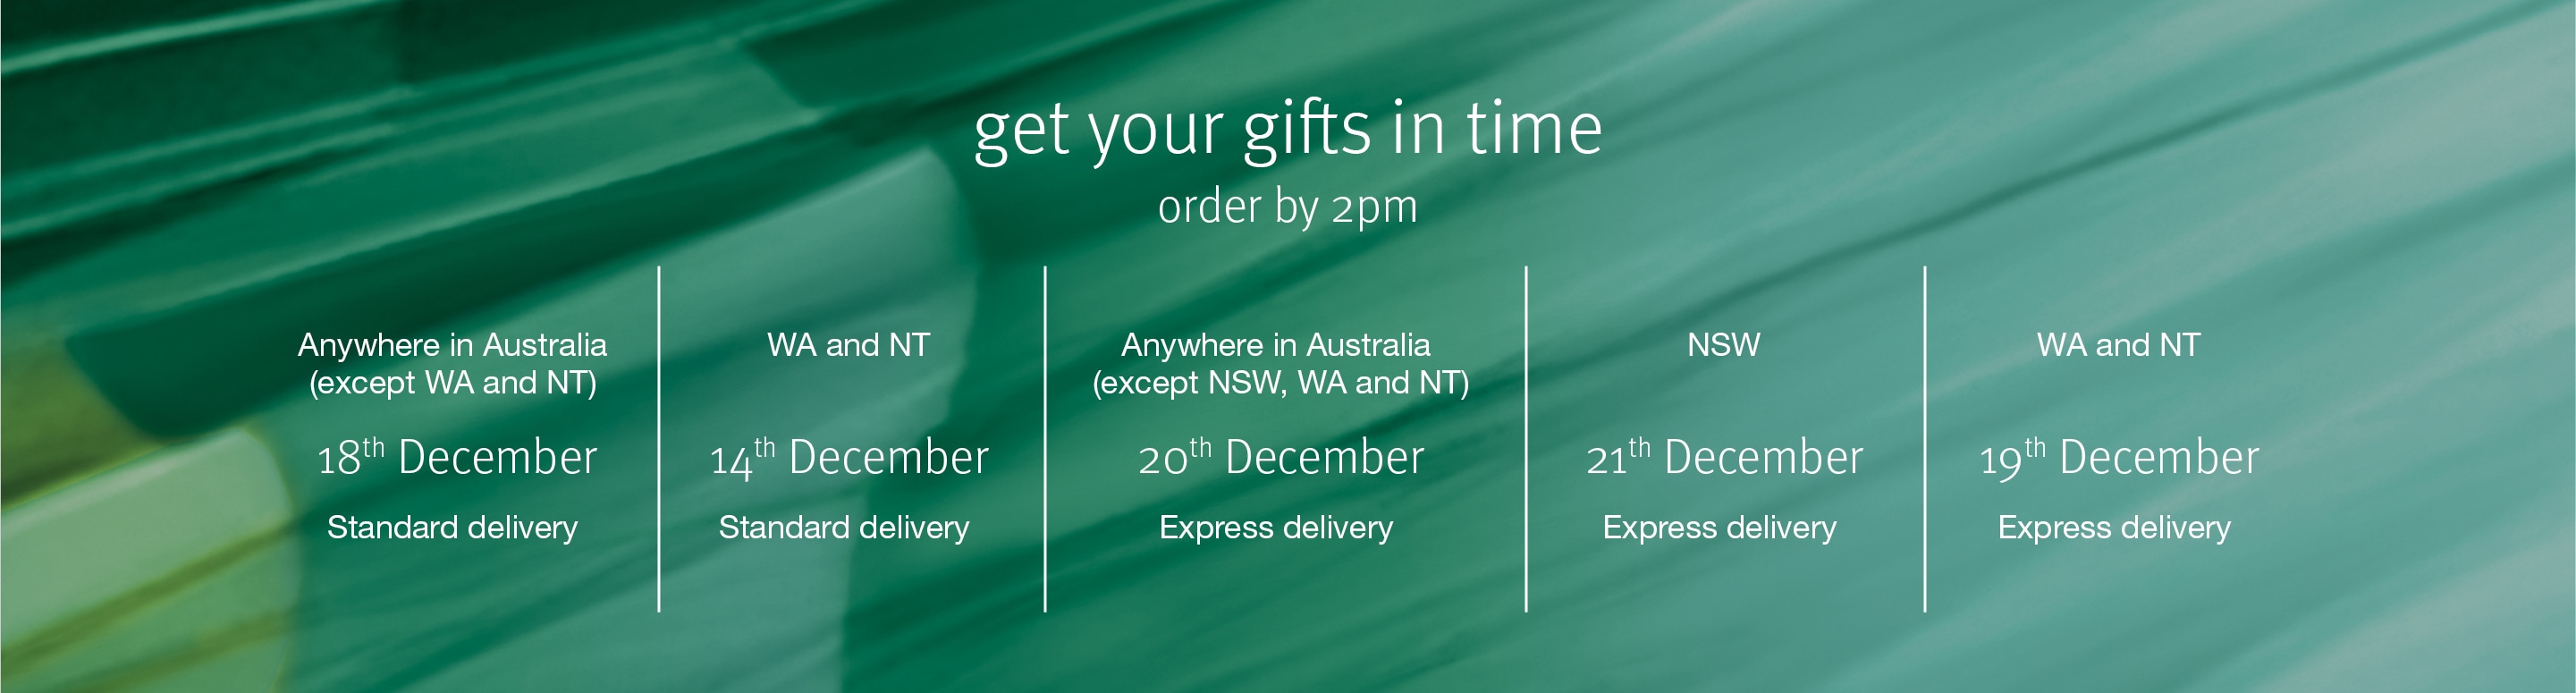 get your gifts in time for the holidays